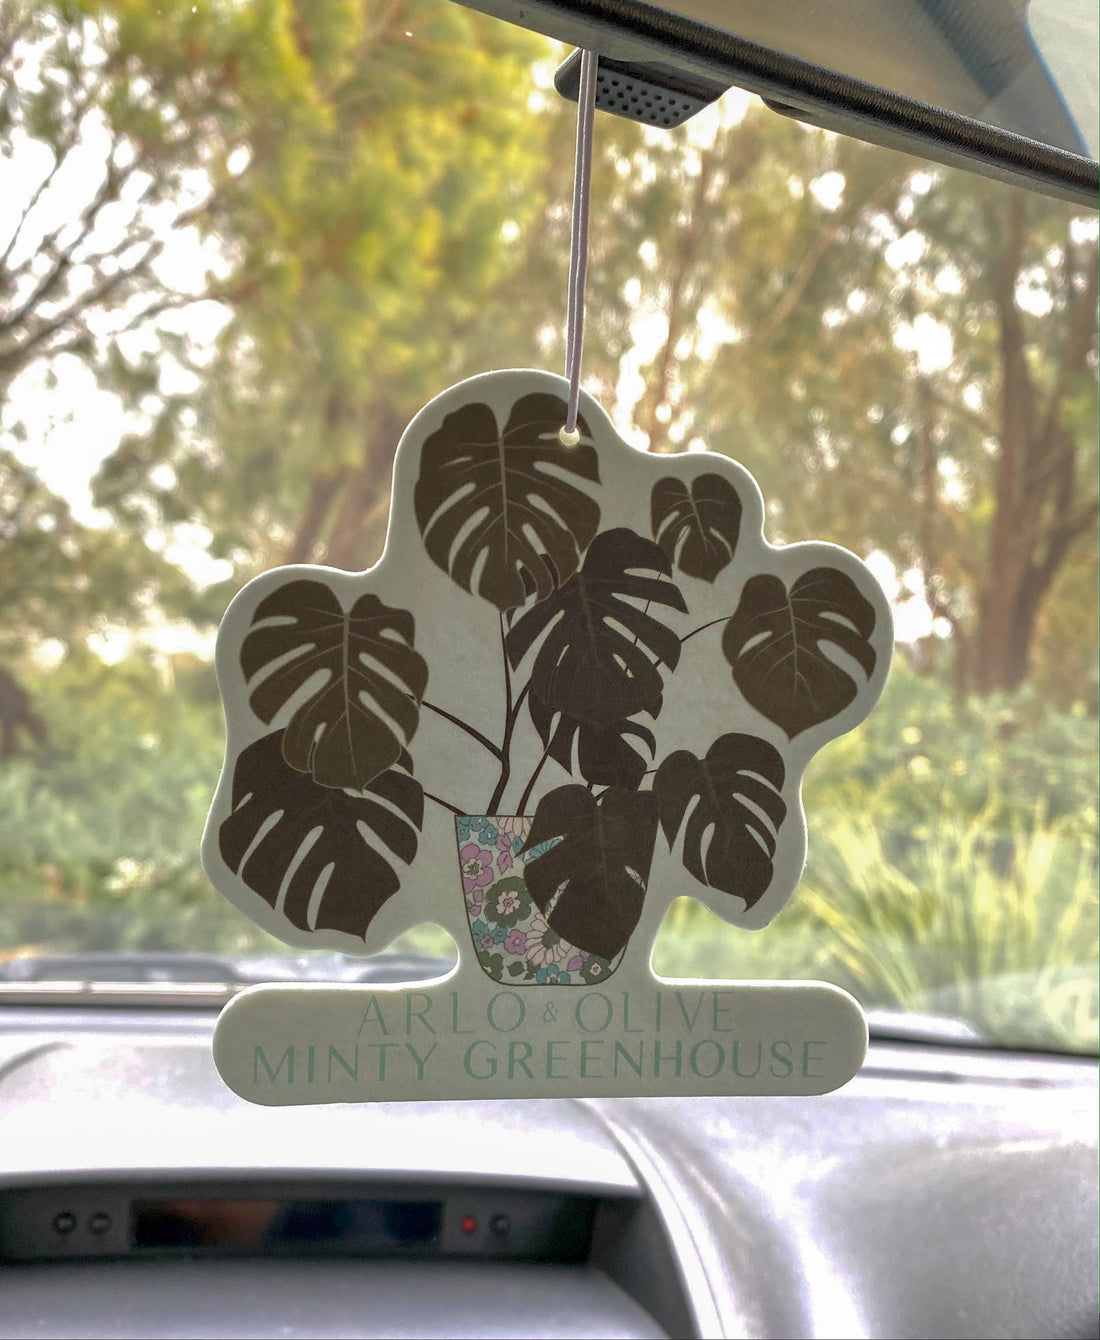 Coconut Car Freshener - Arlo and Olive x Minty Greenhouse